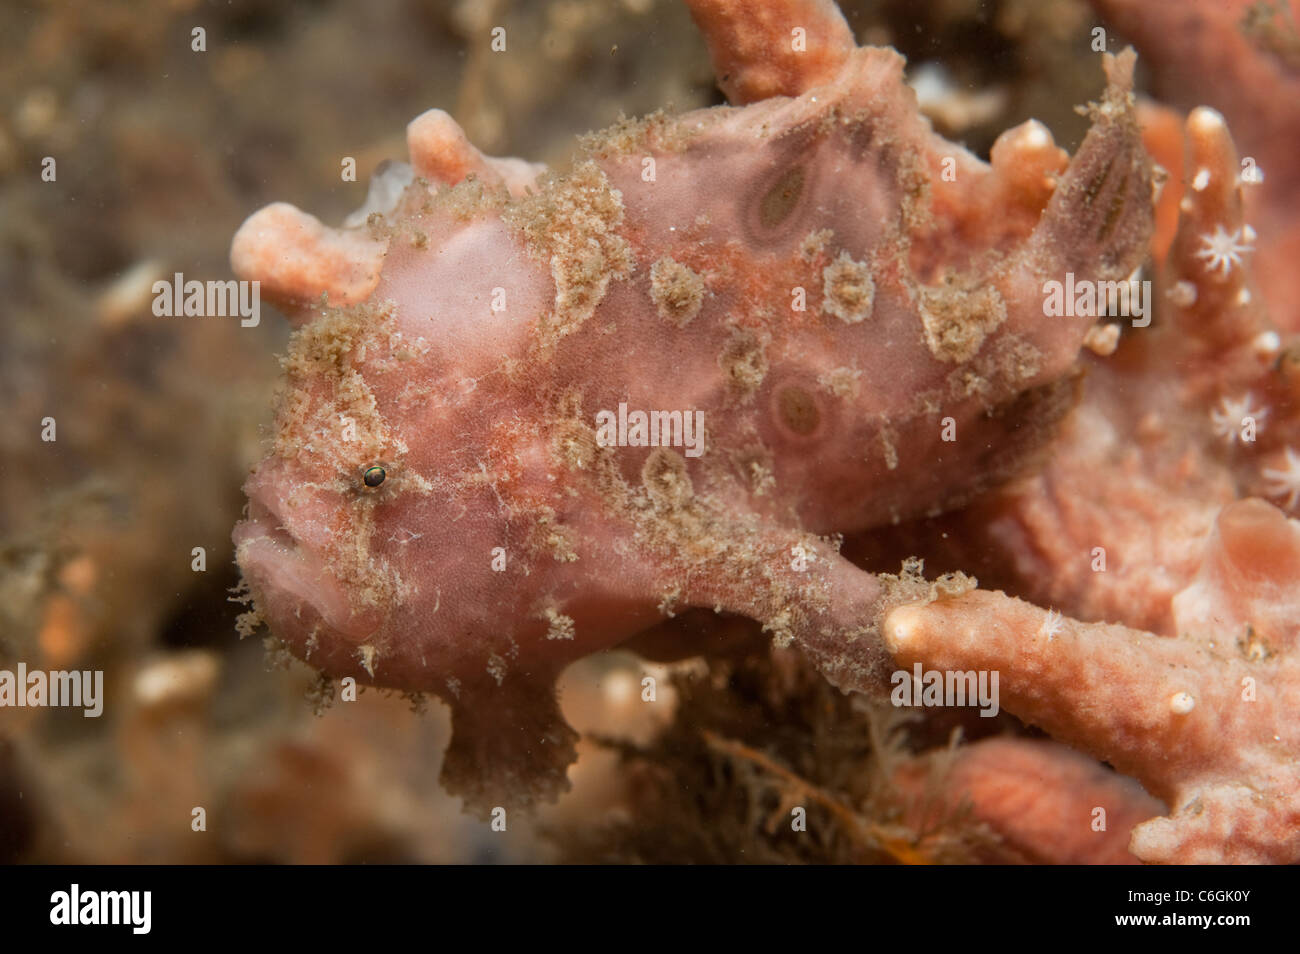 Ocellated Frogfish, Antennarius ocellatus,  hides among sponges in the Lake Worth Lagoon, Singer Island, Florida. Stock Photo